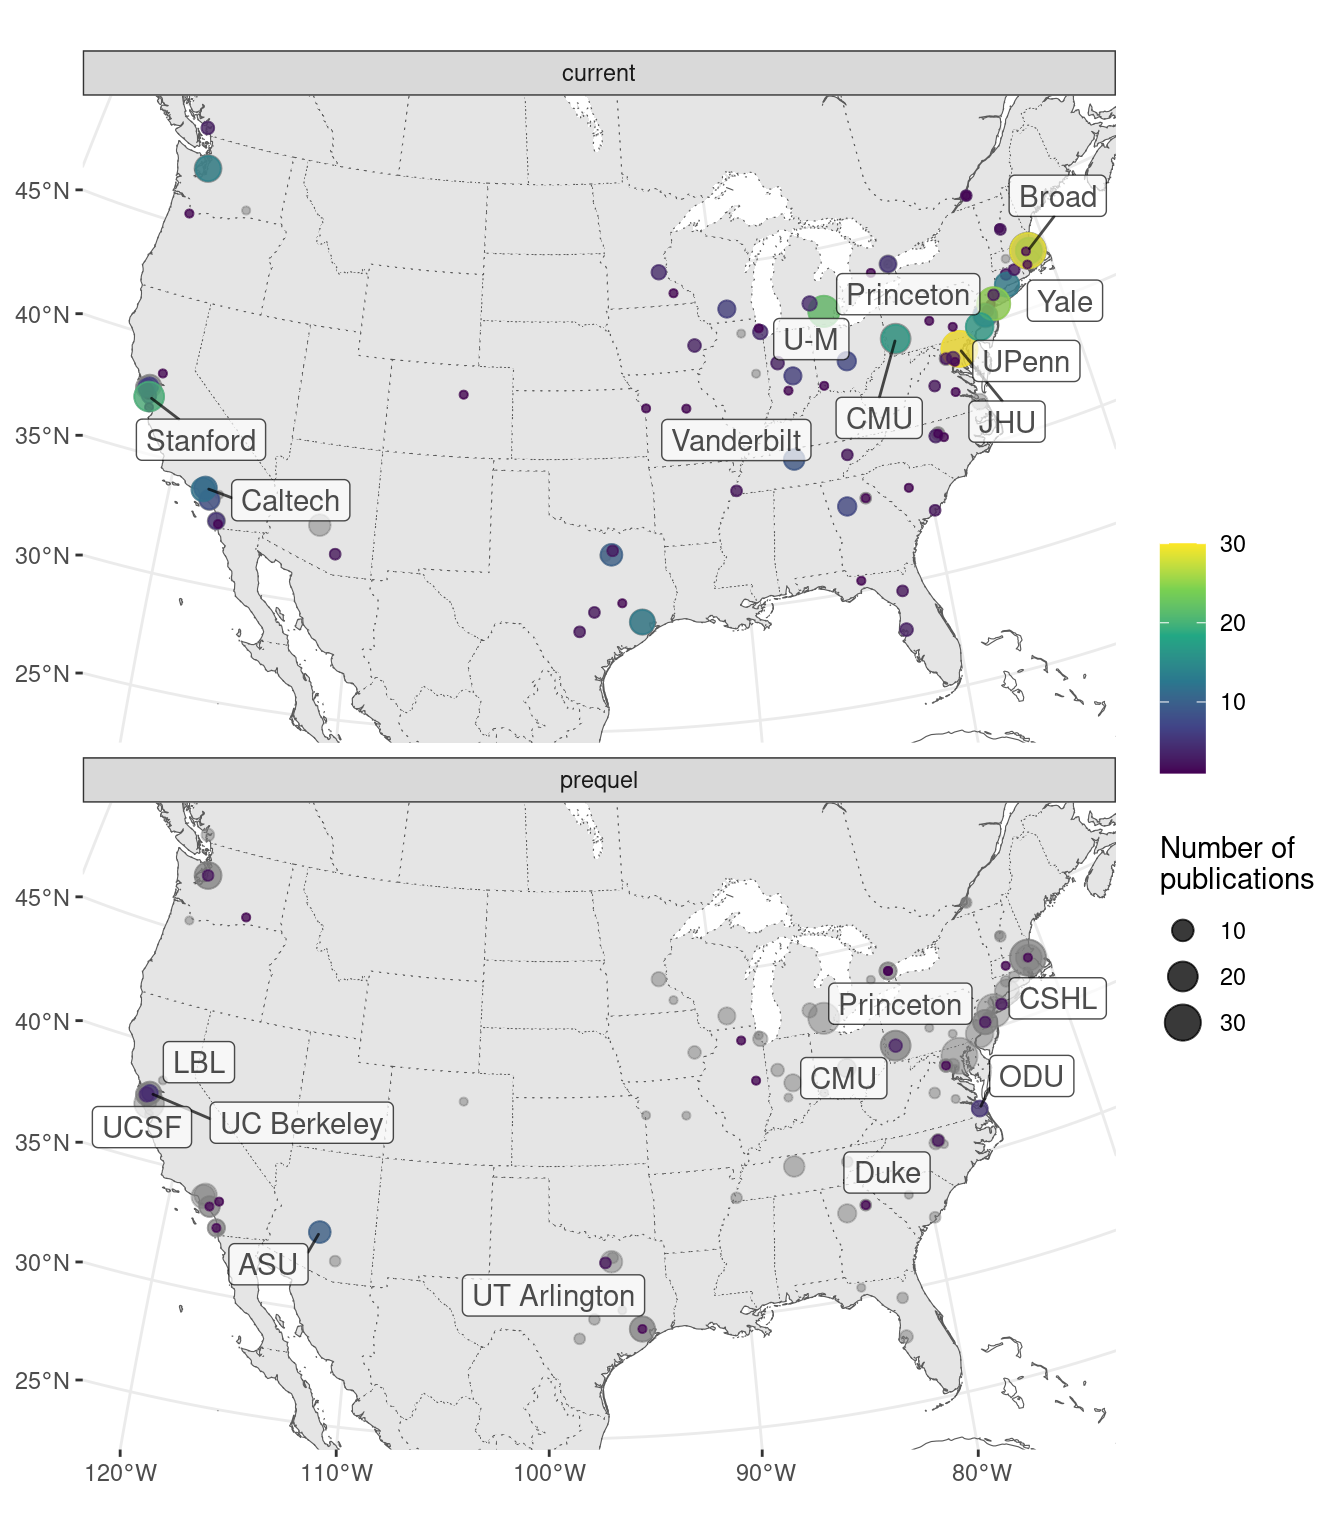 Map of where first authors of current era and prequel data analysis papers were located as of publication around continental US. Top 5 institutions in each era are labeled.